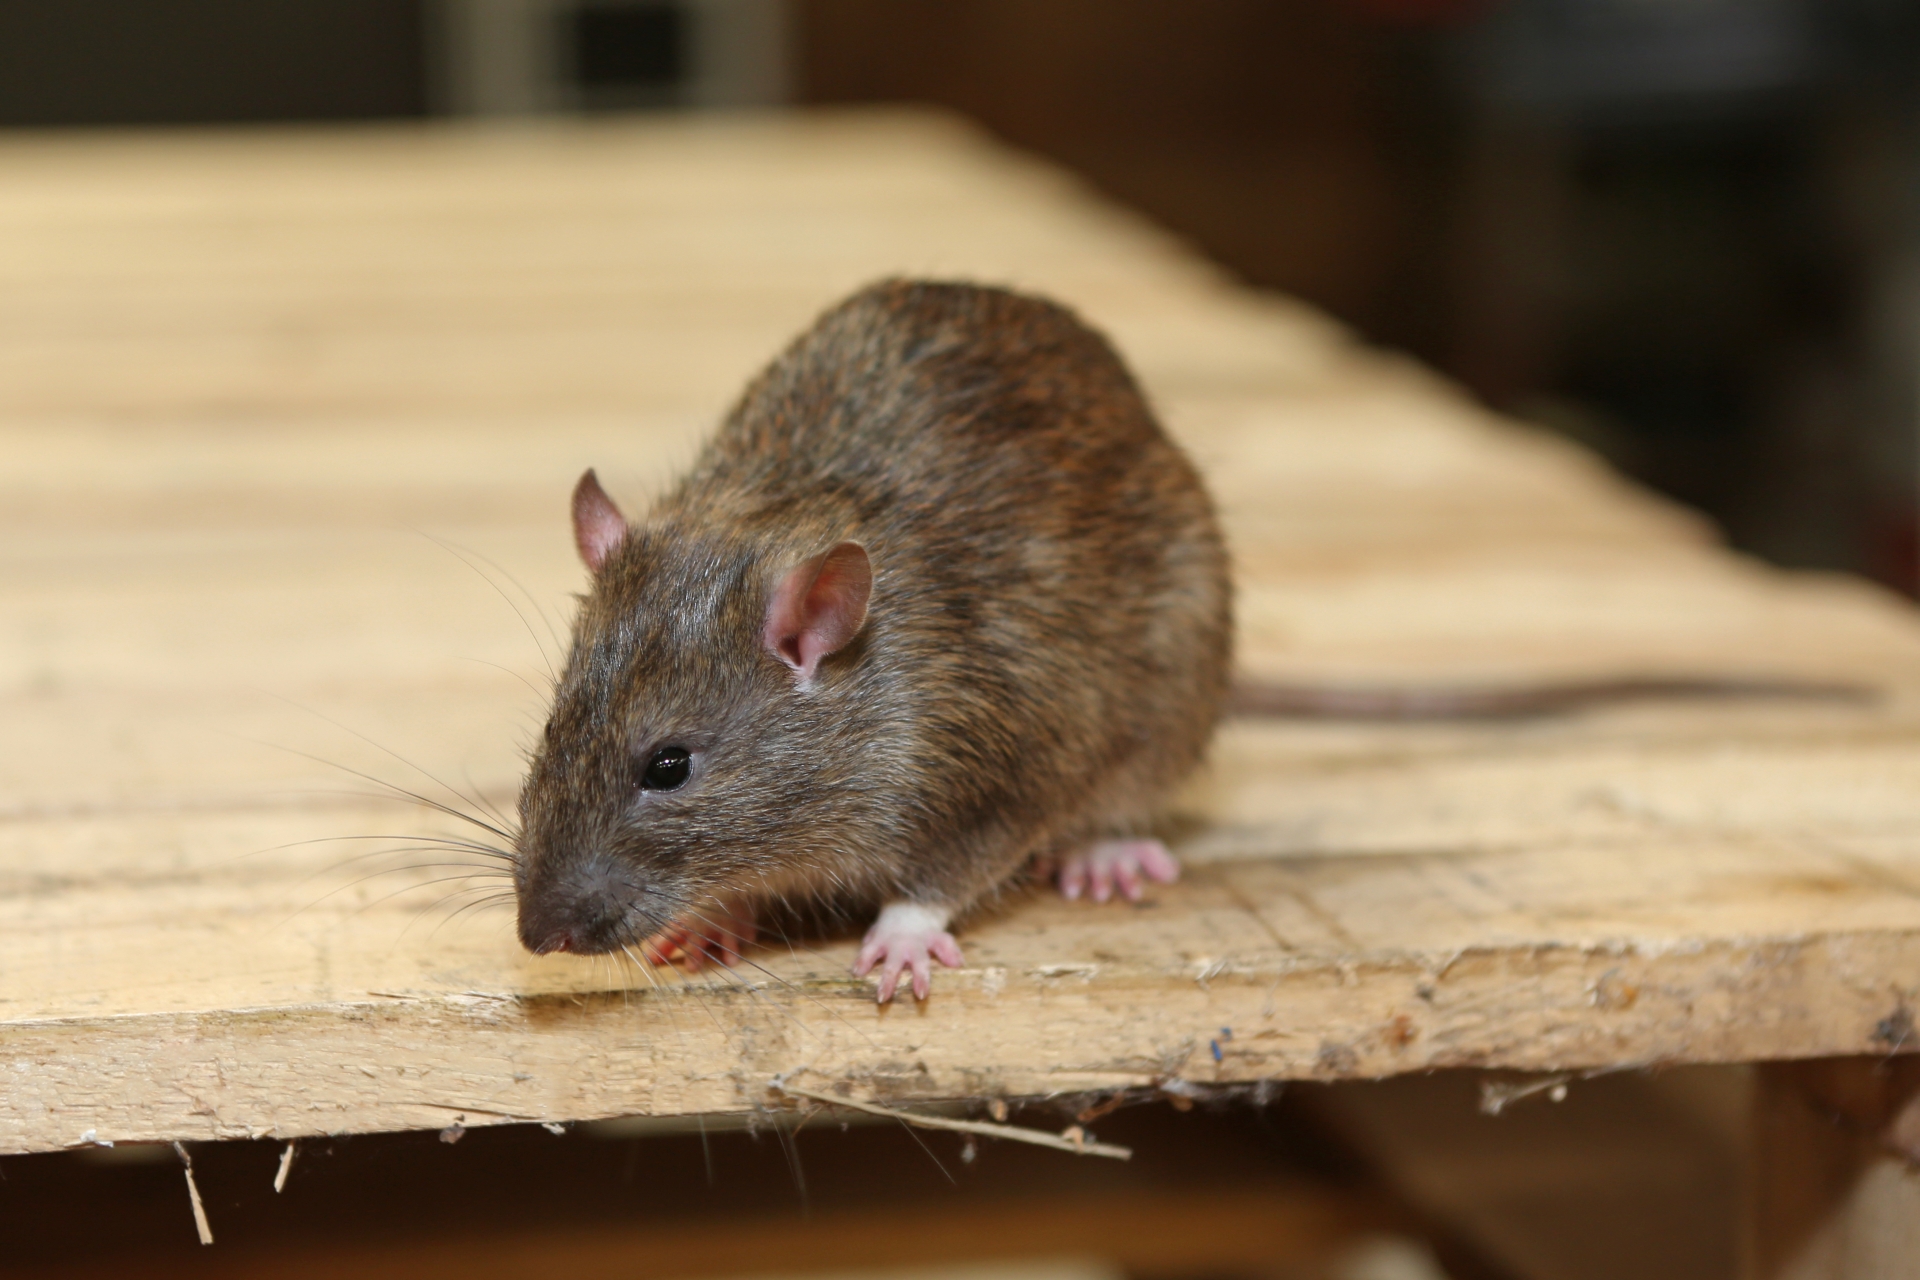 Rat Infestation, Pest Control in Norbury, SW16. Call Now 020 8166 9746